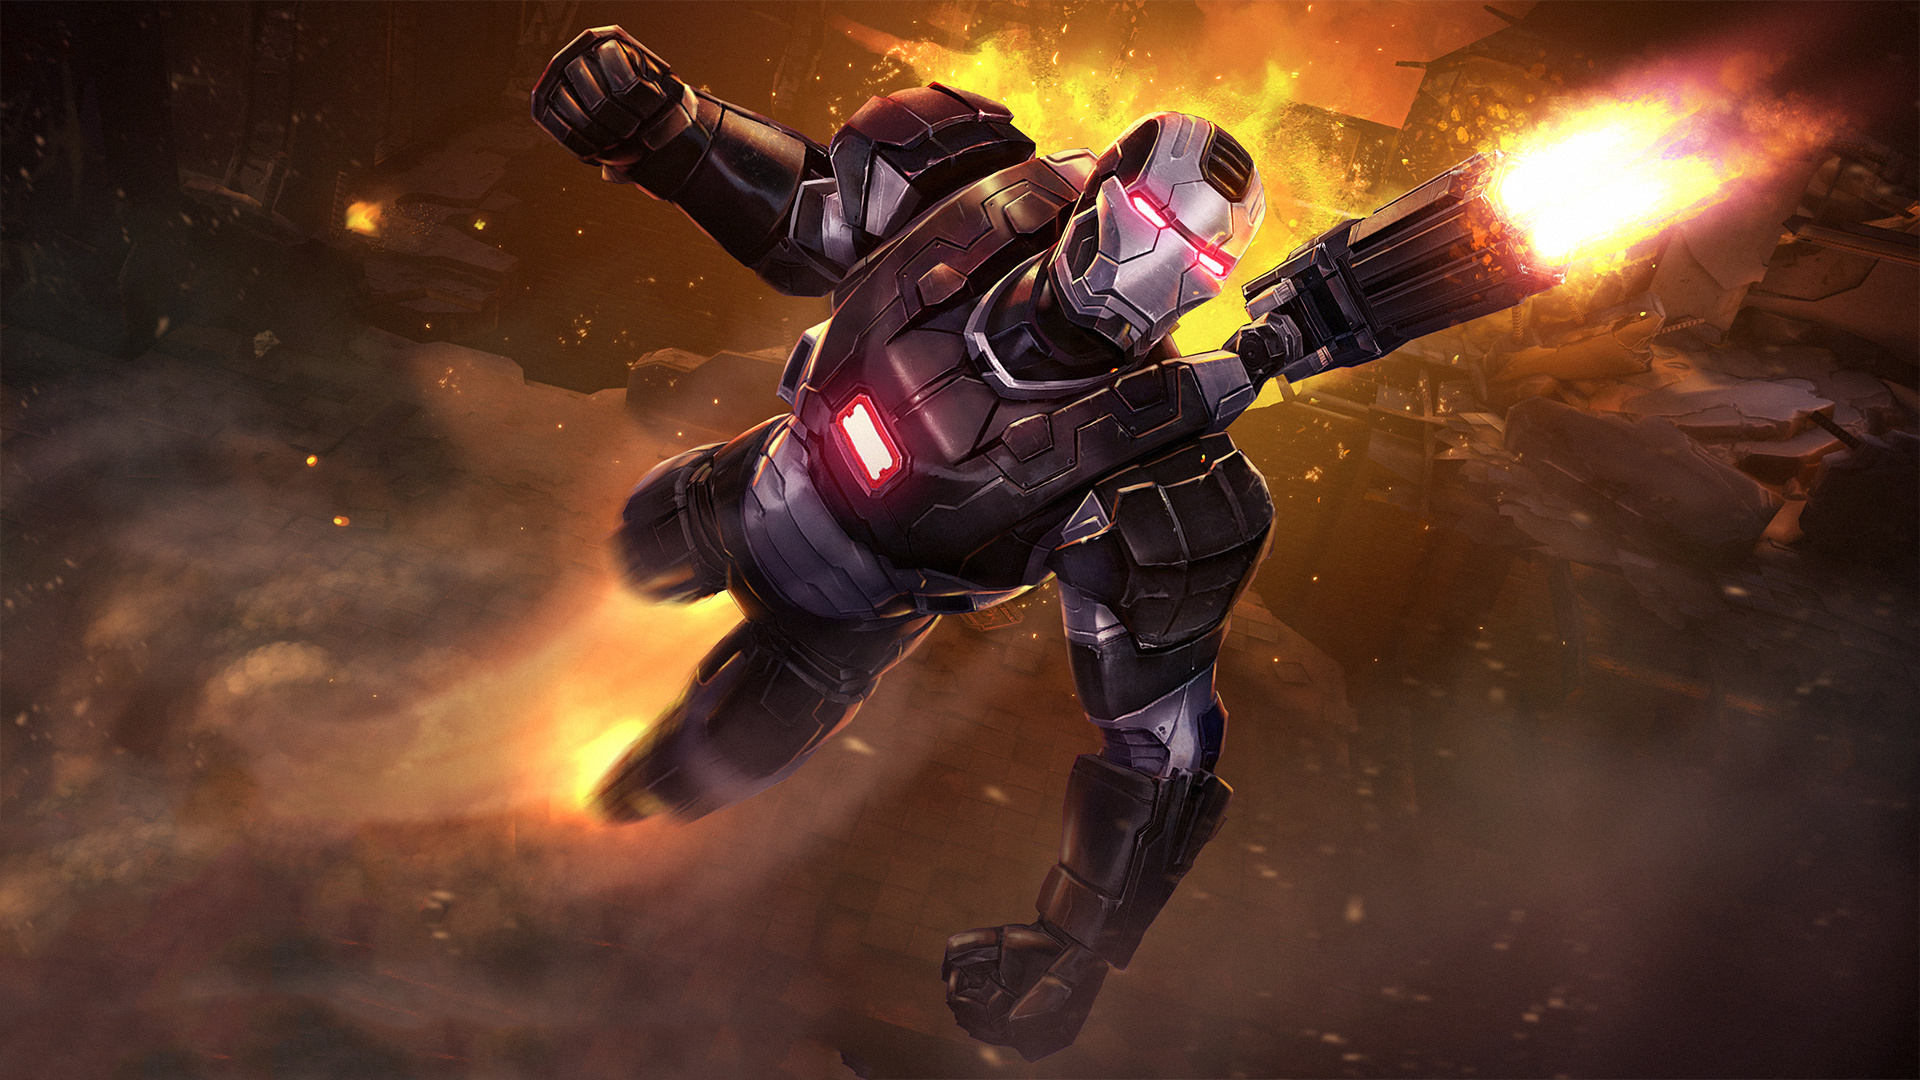 War Machine, Marvel movies, Contest of Champions, Gaming wallpapers, 1920x1080 Full HD Desktop